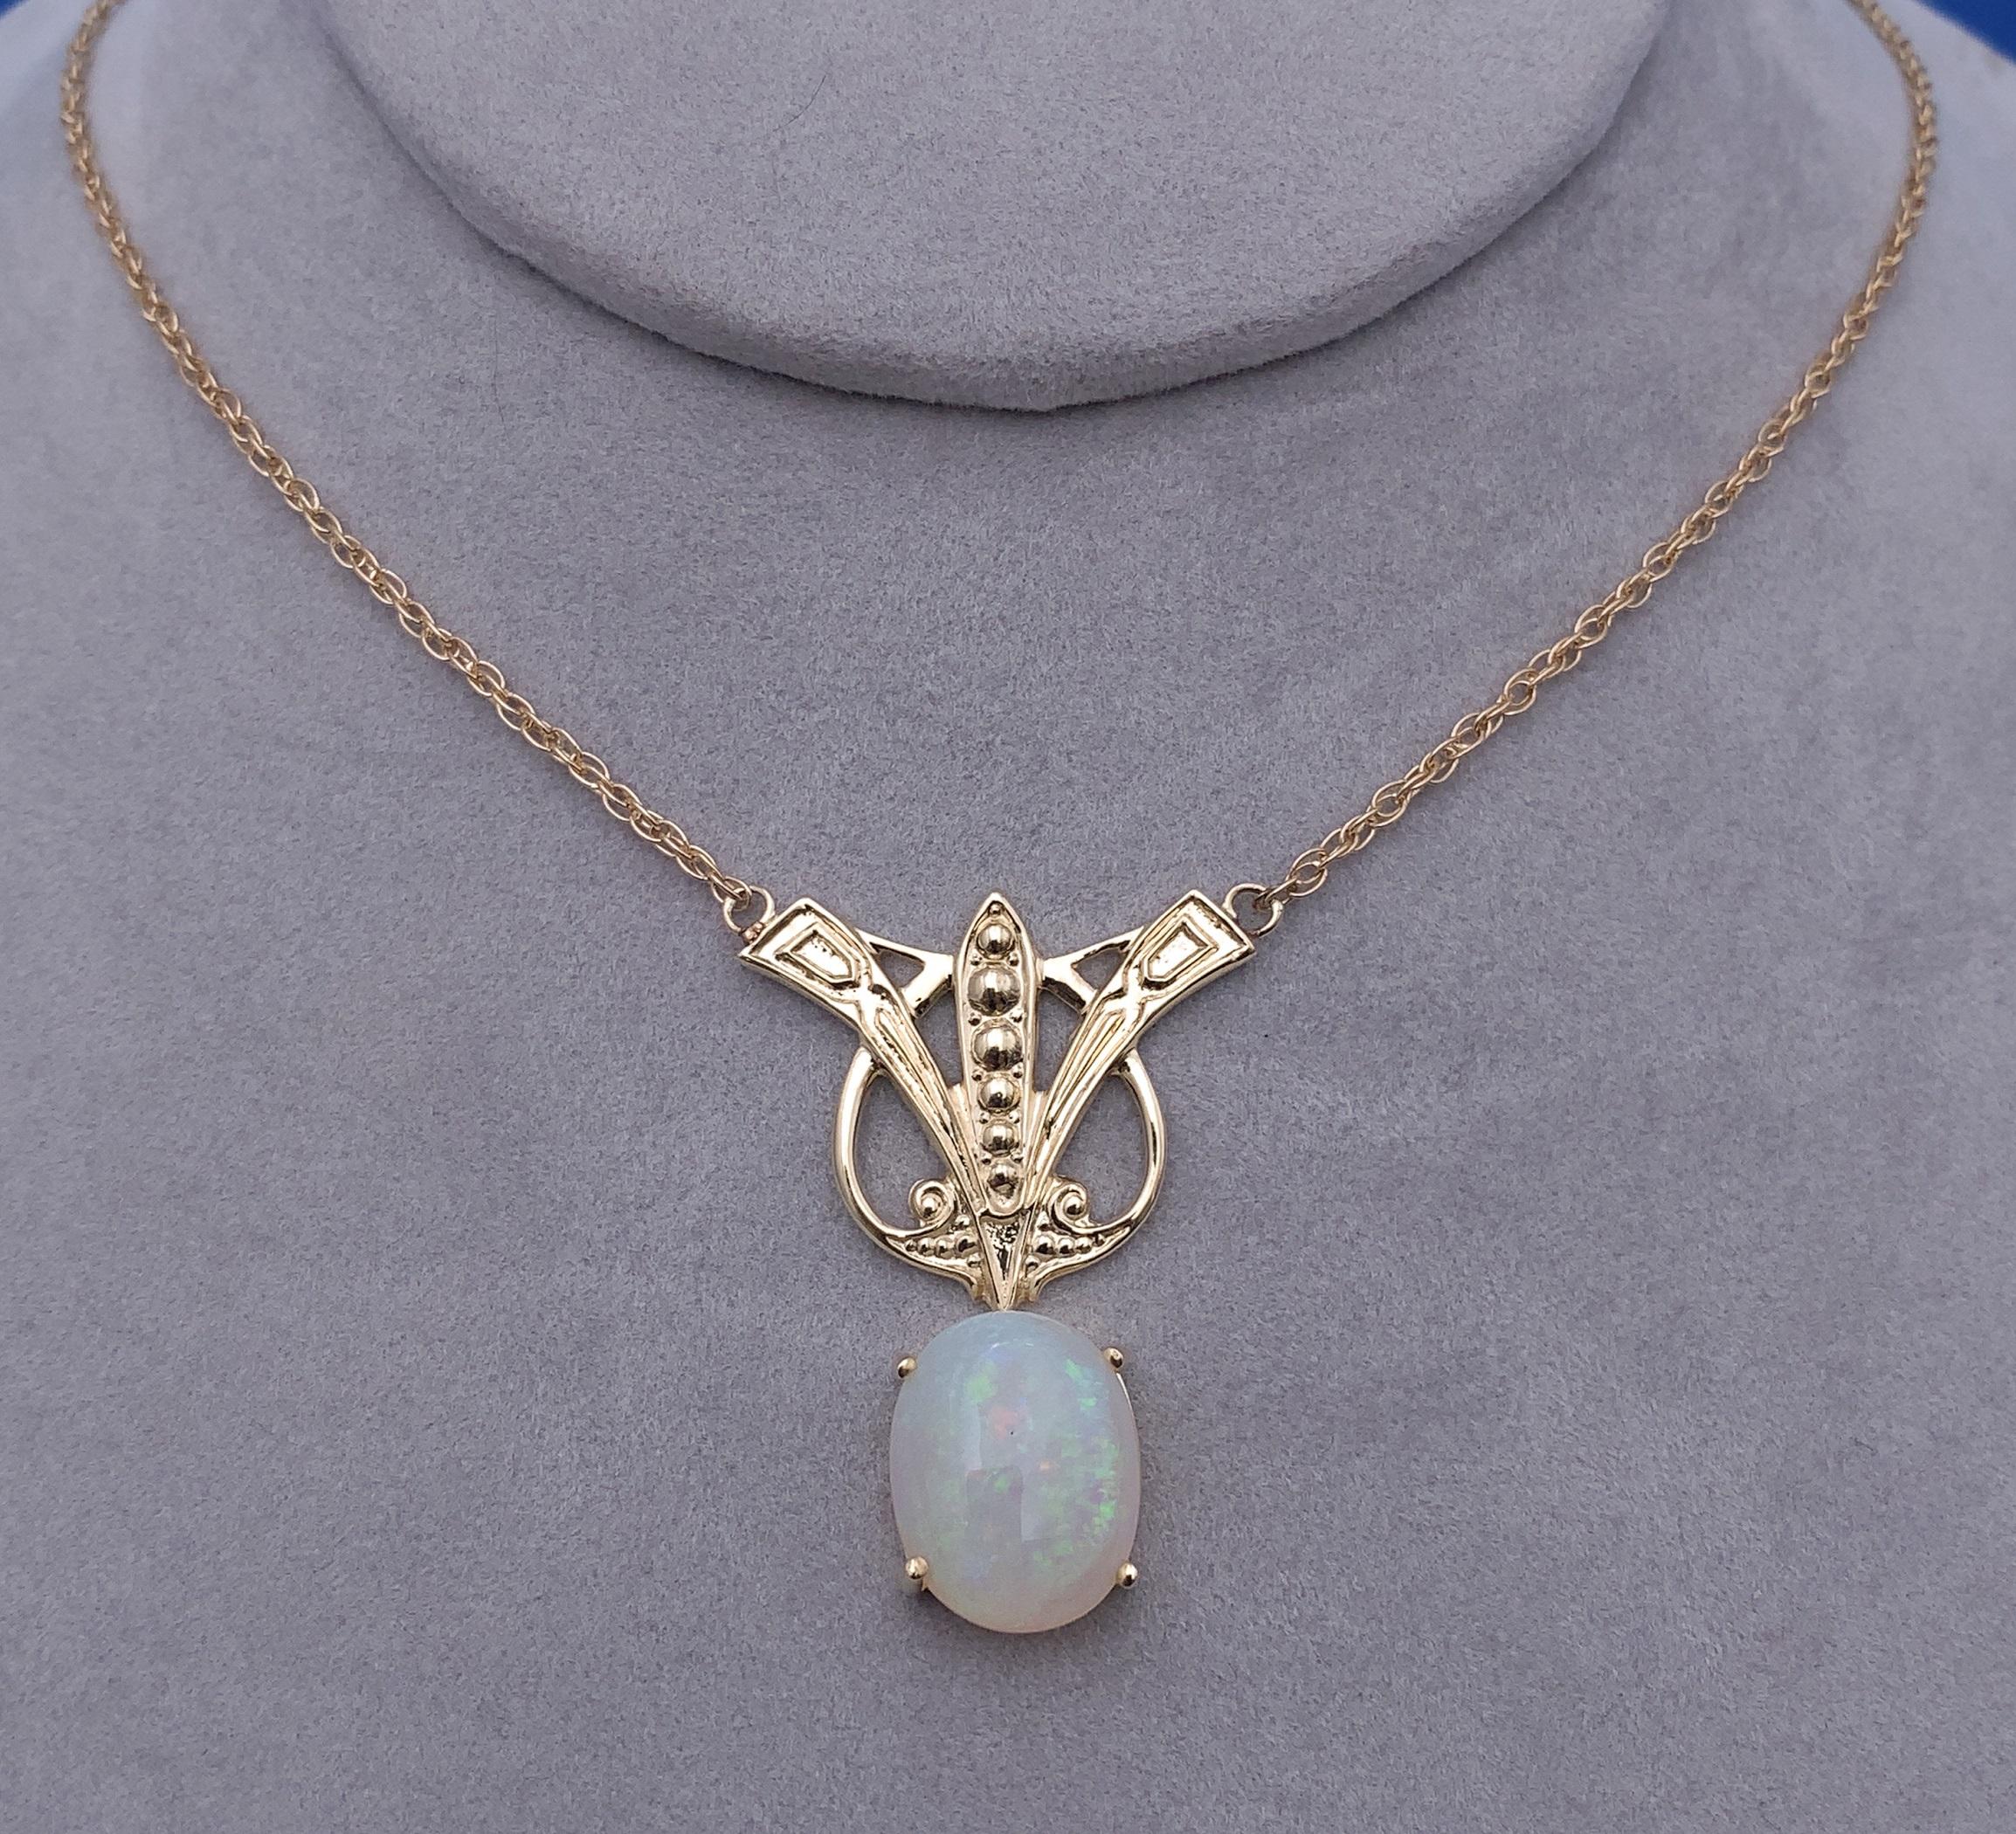 14k Art Deco Style 8 Carat Opal Necklace In Excellent Condition For Sale In Big Bend, WI